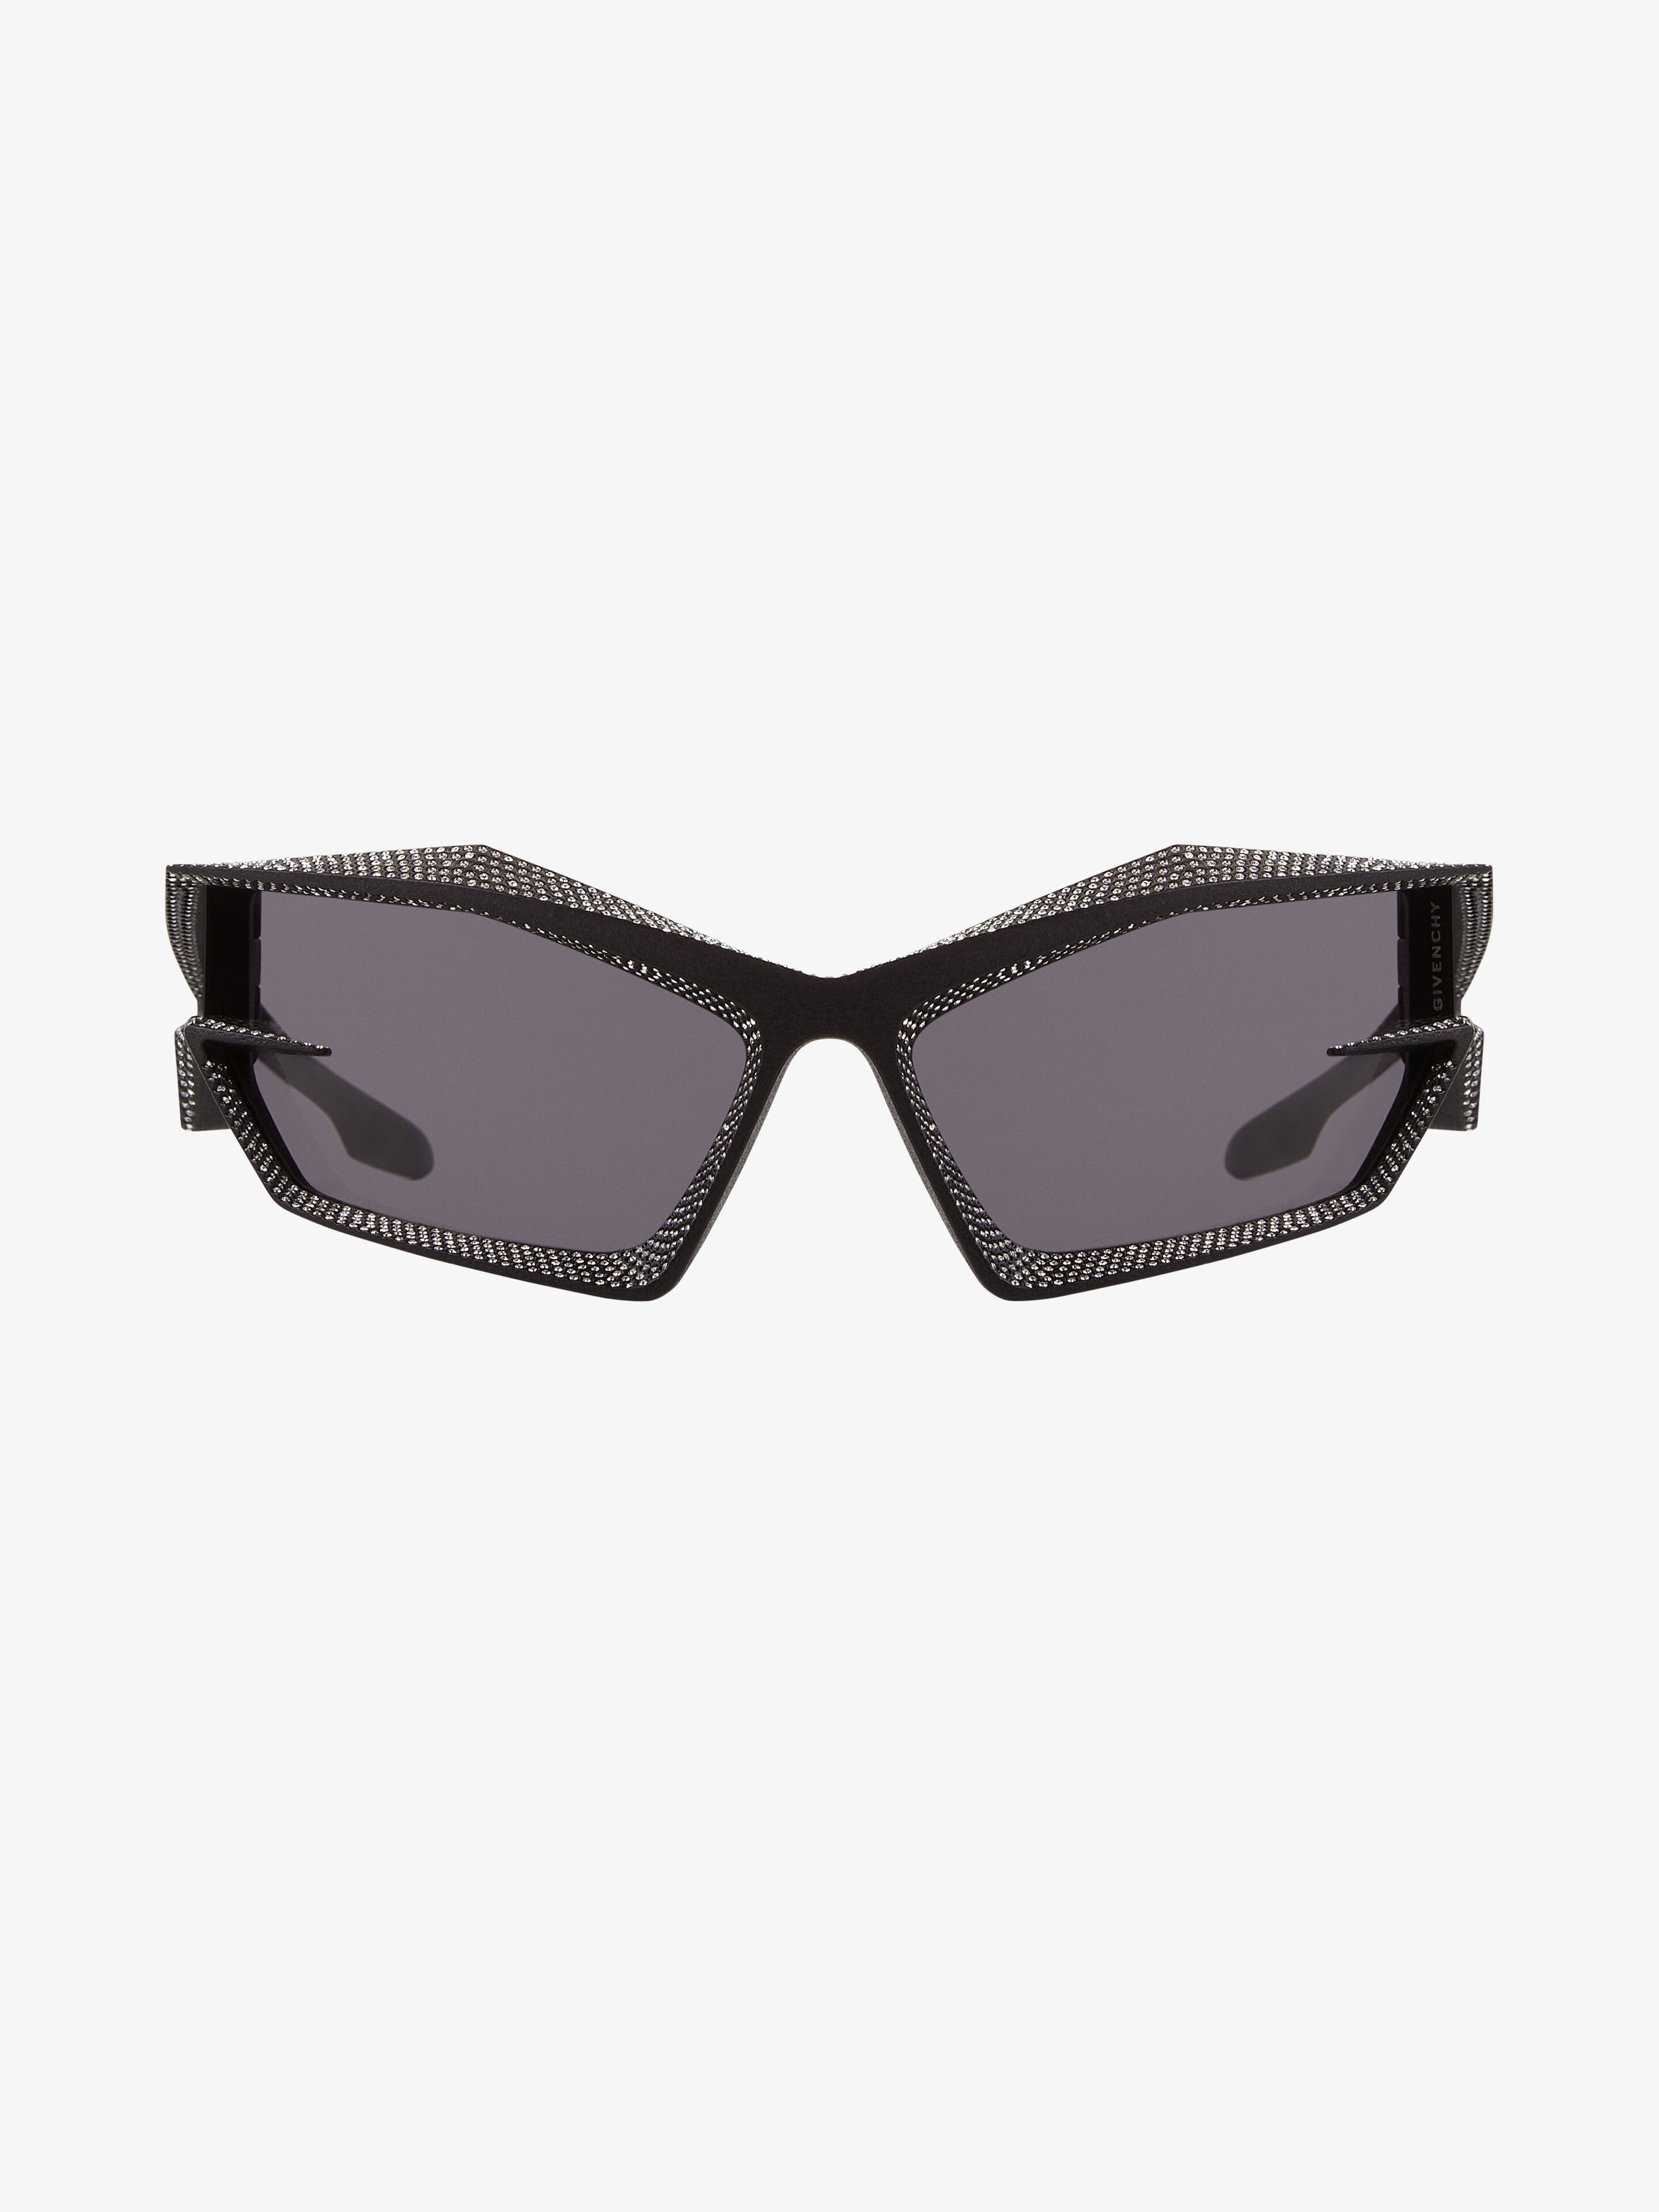 GIV CUT UNISEX SUNGLASSES IN METAL WITH CRYSTALS - 5